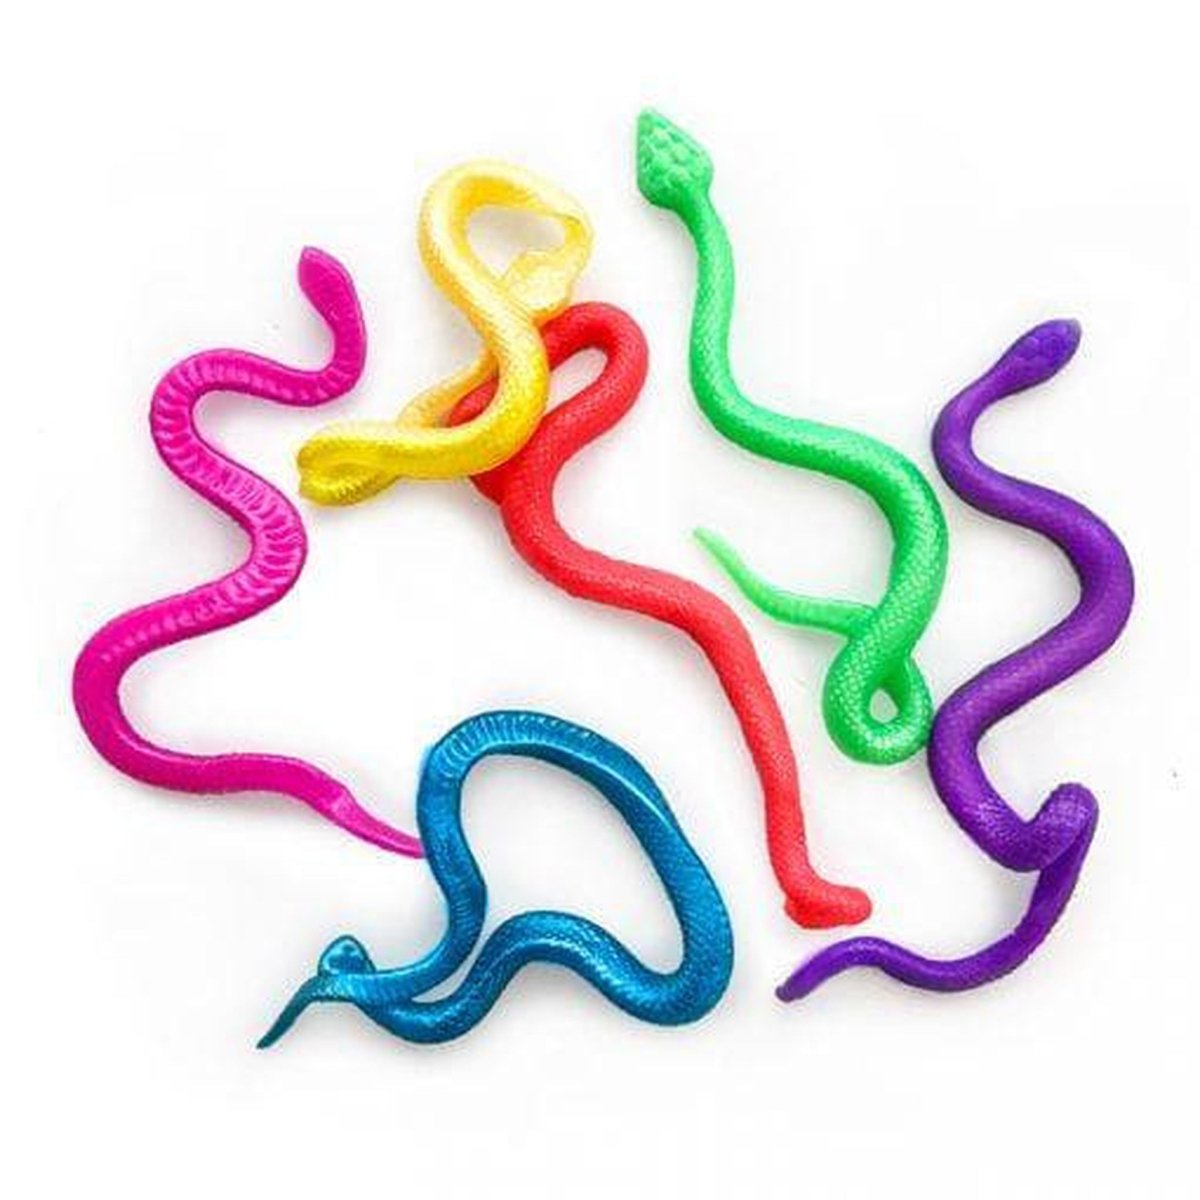 Stretchy Snakes x 5 - Kids Party Craft